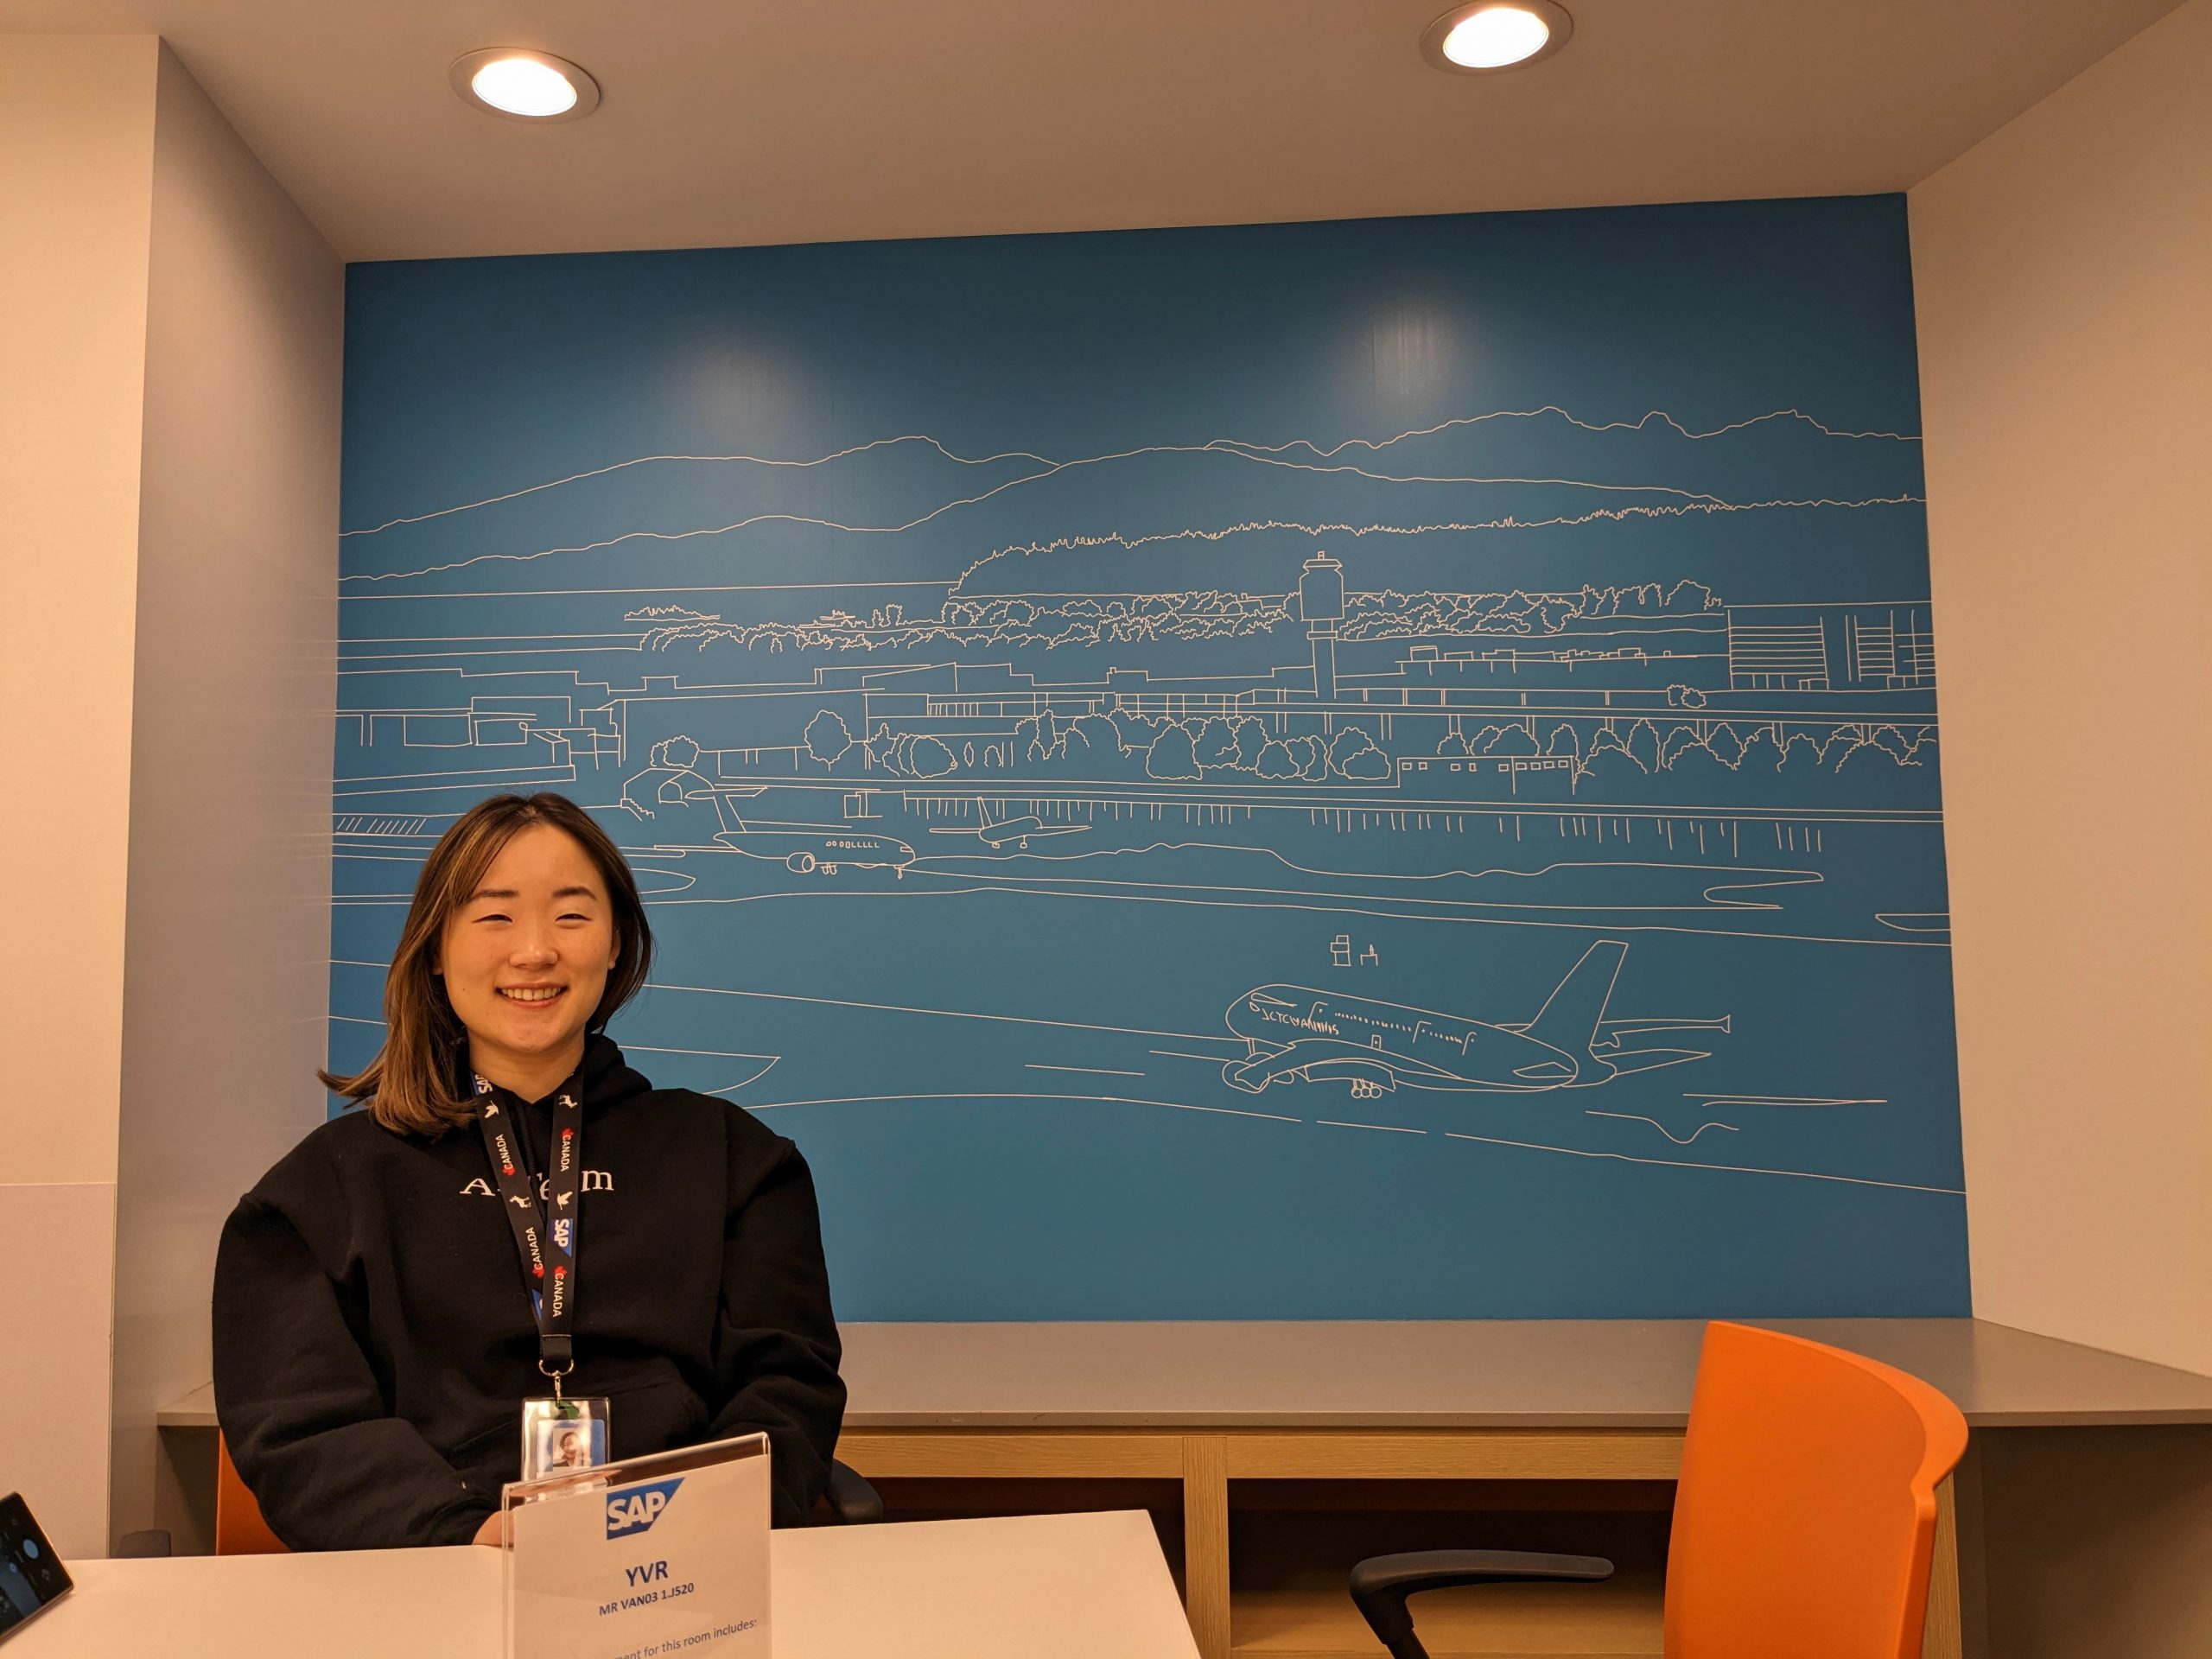 A young woman with midlength dark hair sits in a conference room at SAP. Behind her is a line drawn art piece showing an airport with mountains behind it.